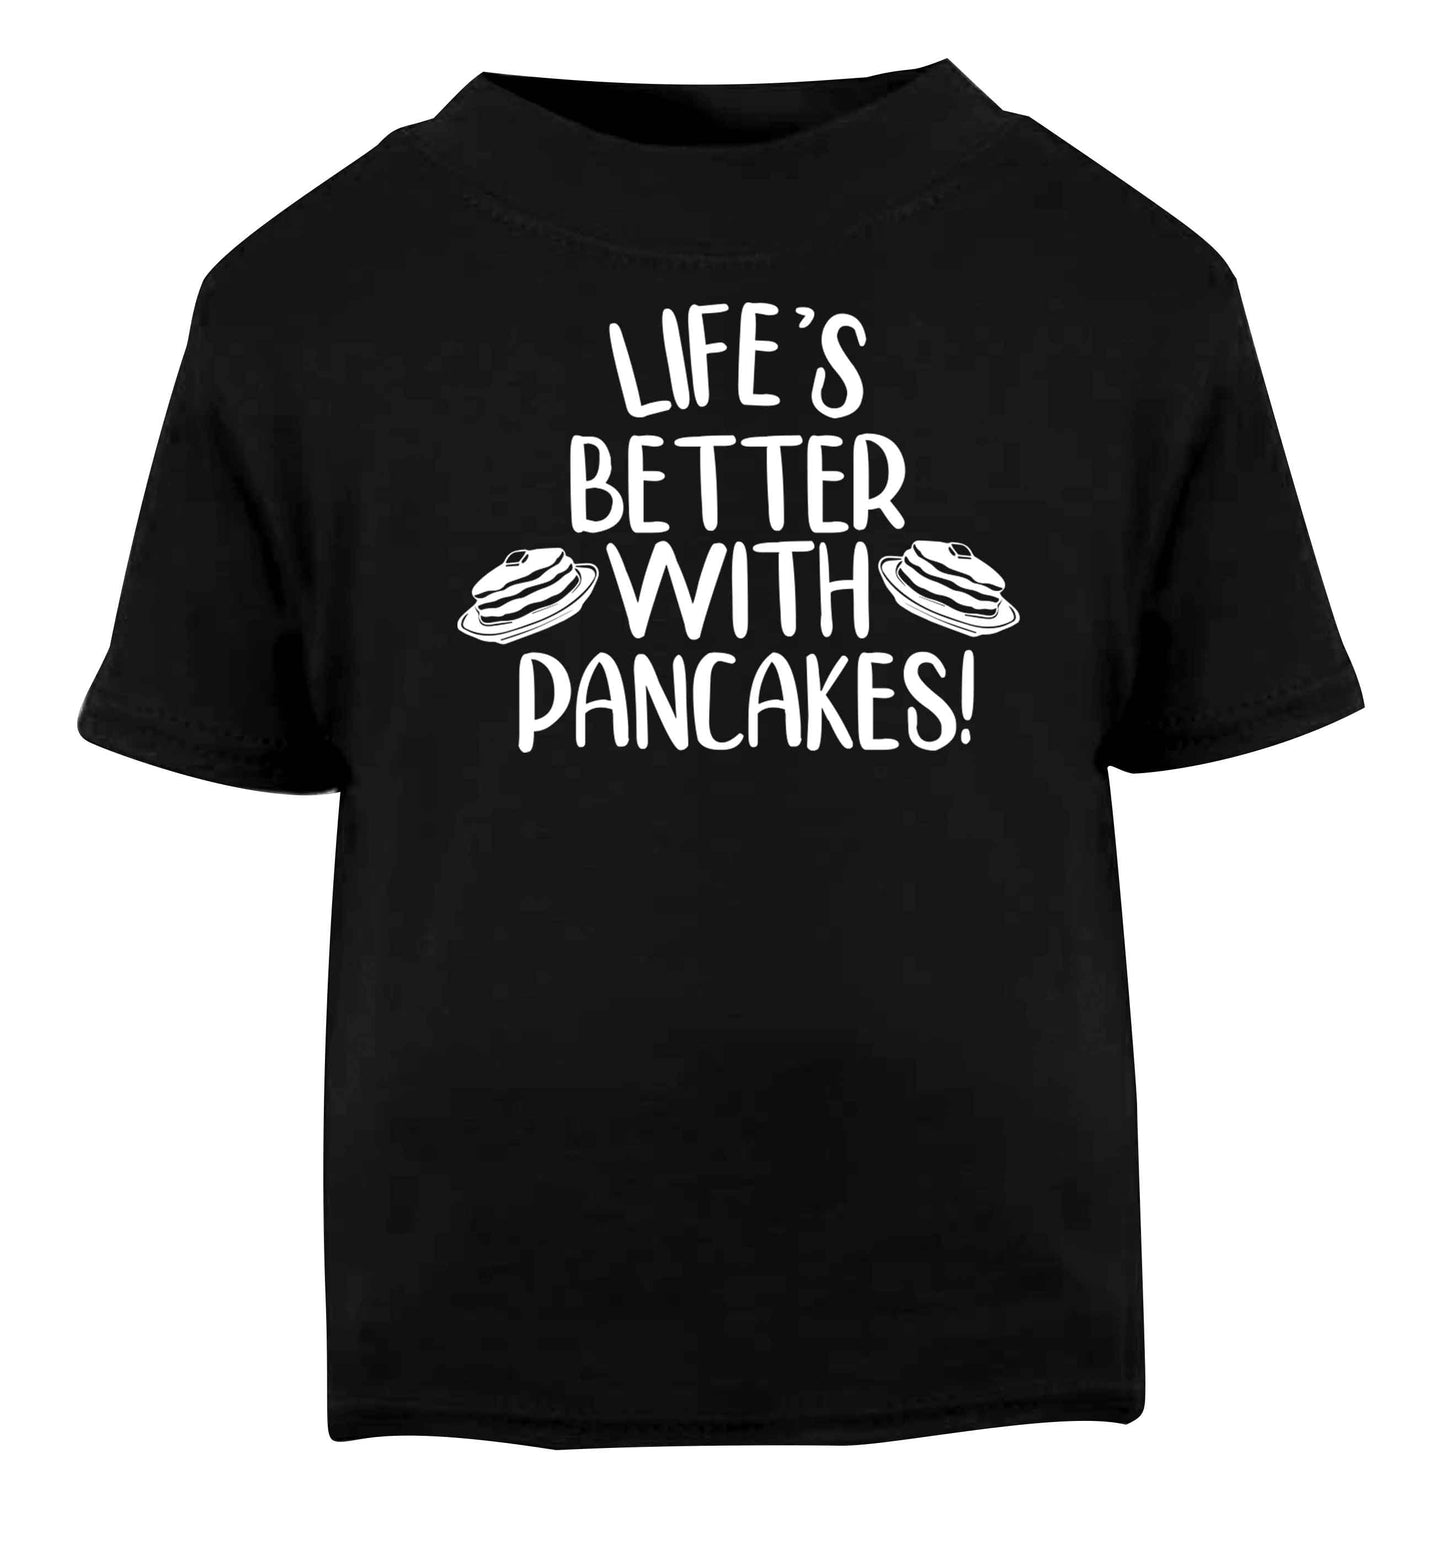 Life's better with pancakes Black baby toddler Tshirt 2 years